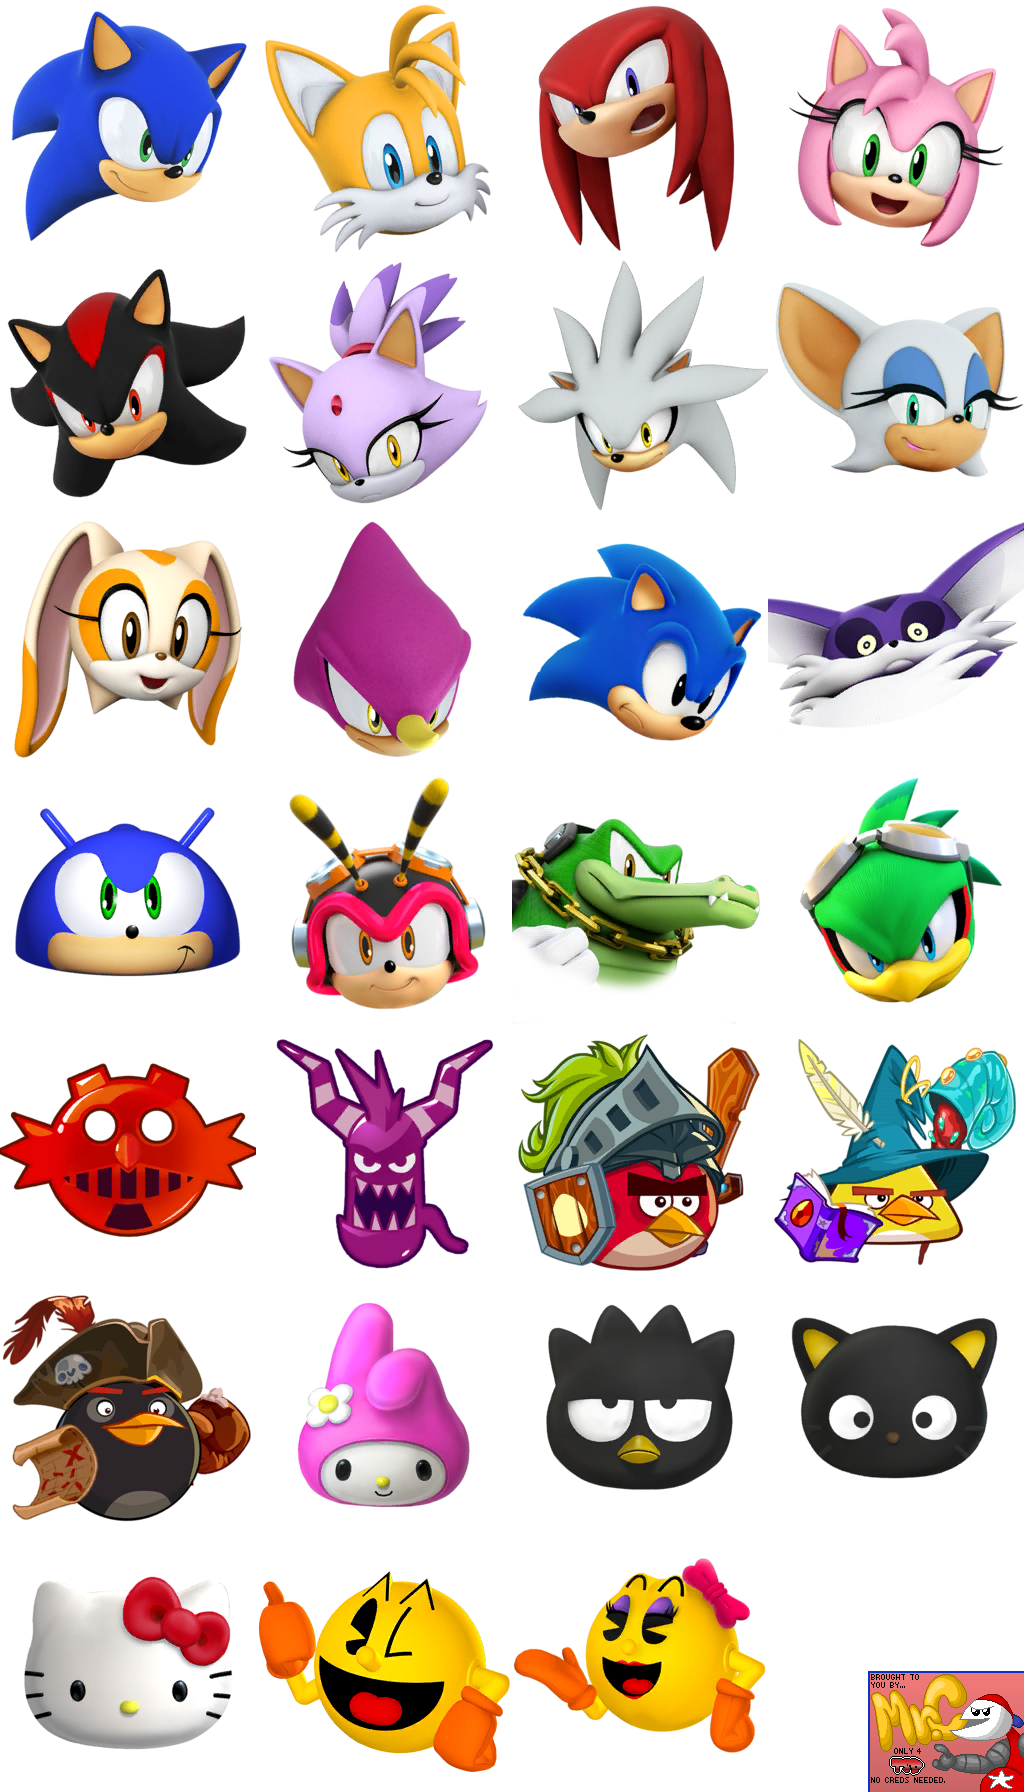 mario and sonic characters names